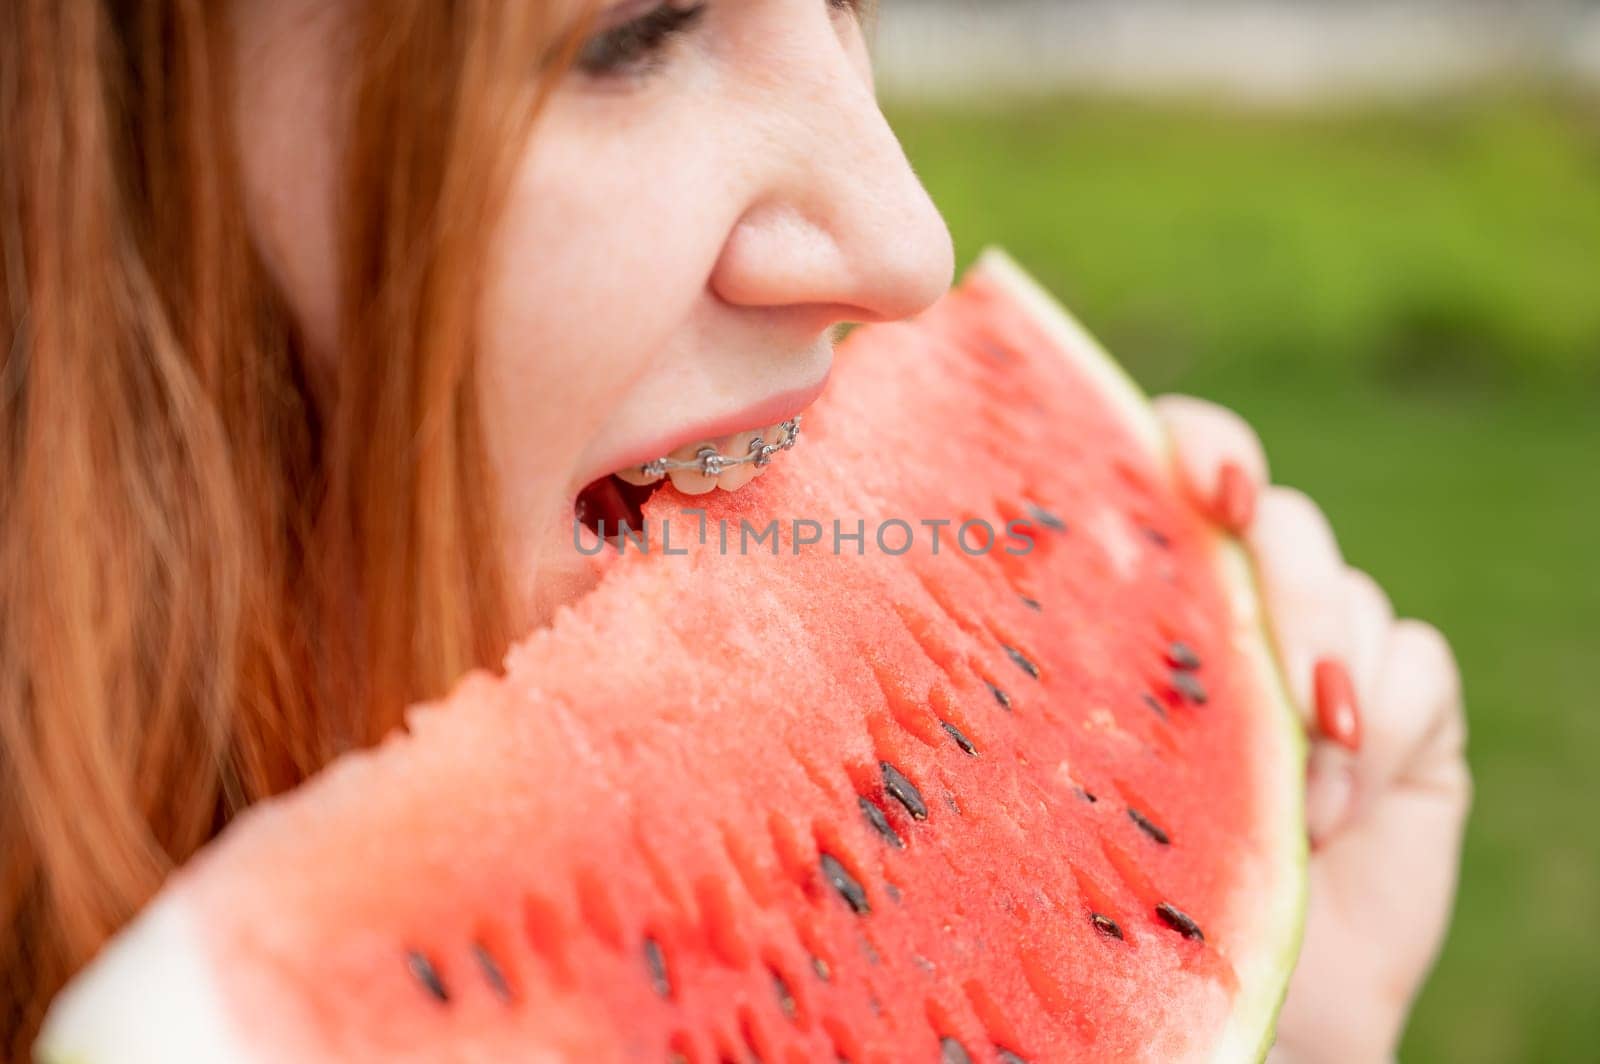 Close-up portrait of red-haired young woman with braces eating watermelon outdoors by mrwed54